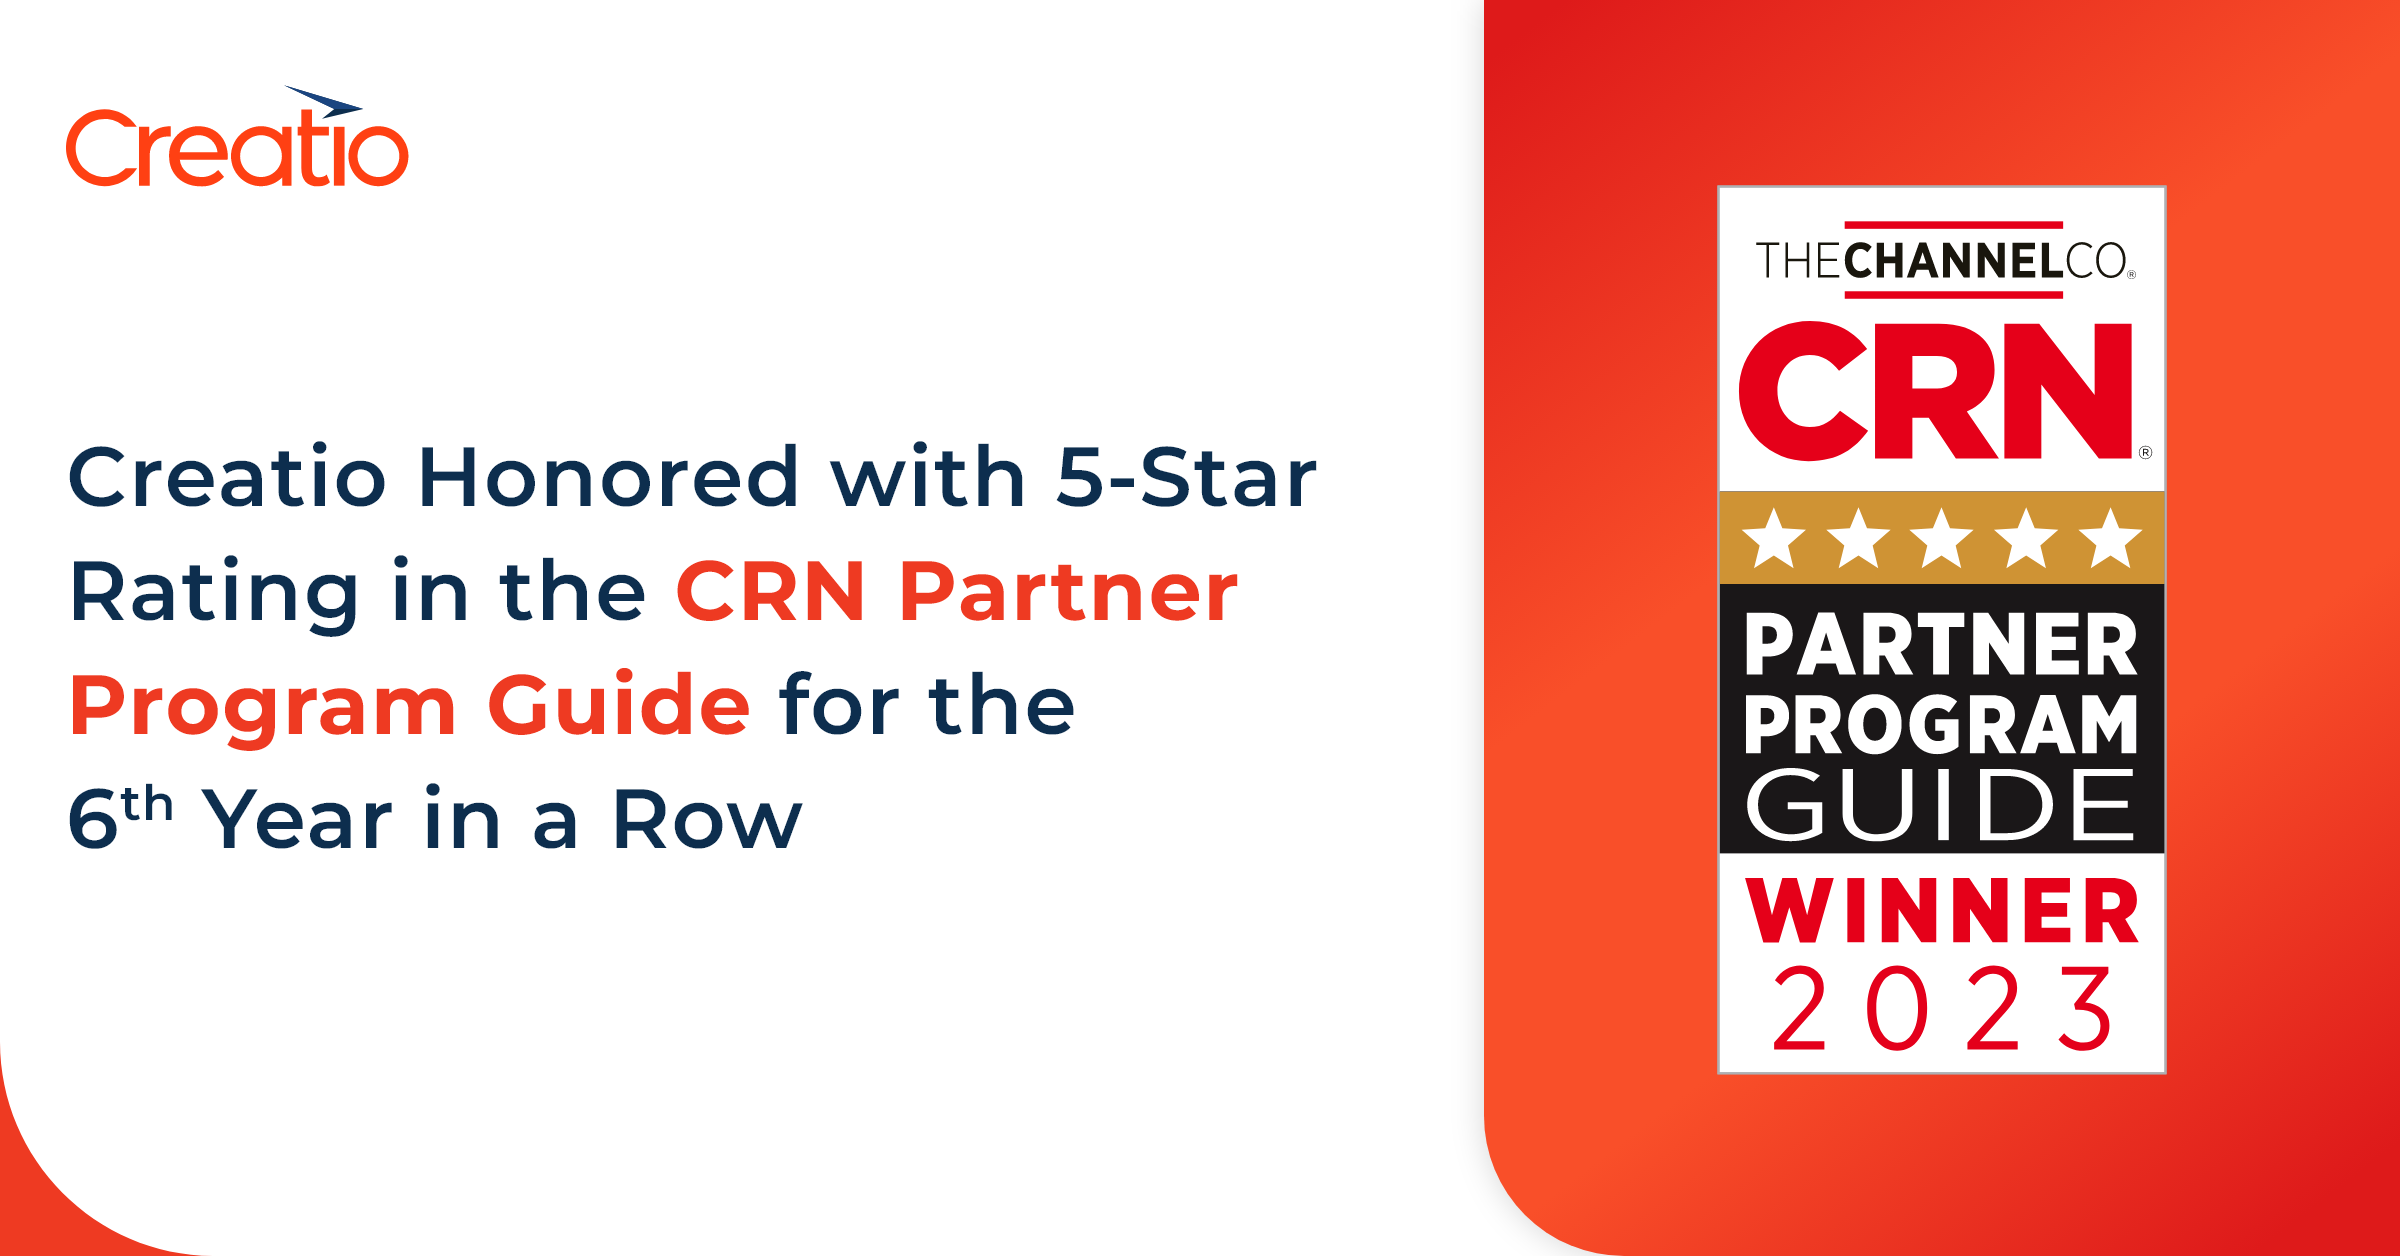 Creatio Honored with 5Star Rating in the CRN Partner Program Guide for